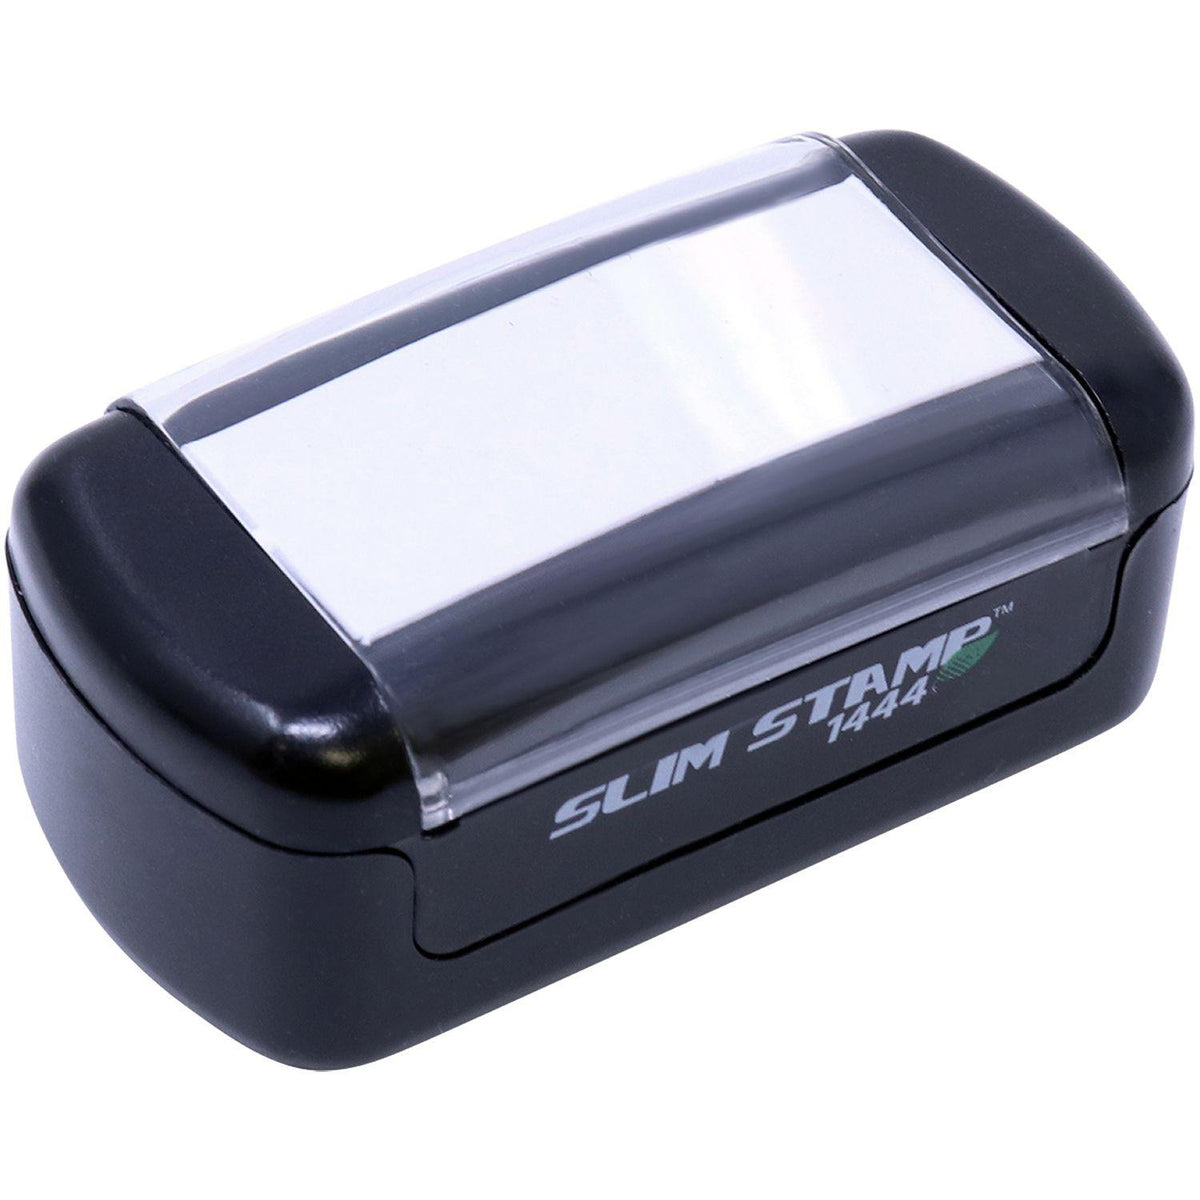 Slim Pre Inked Cash Stamp - Engineer Seal Stamps - Brand_Slim, Impression Size_Small, Stamp Type_Pre-Inked Stamp, Type of Use_Finance